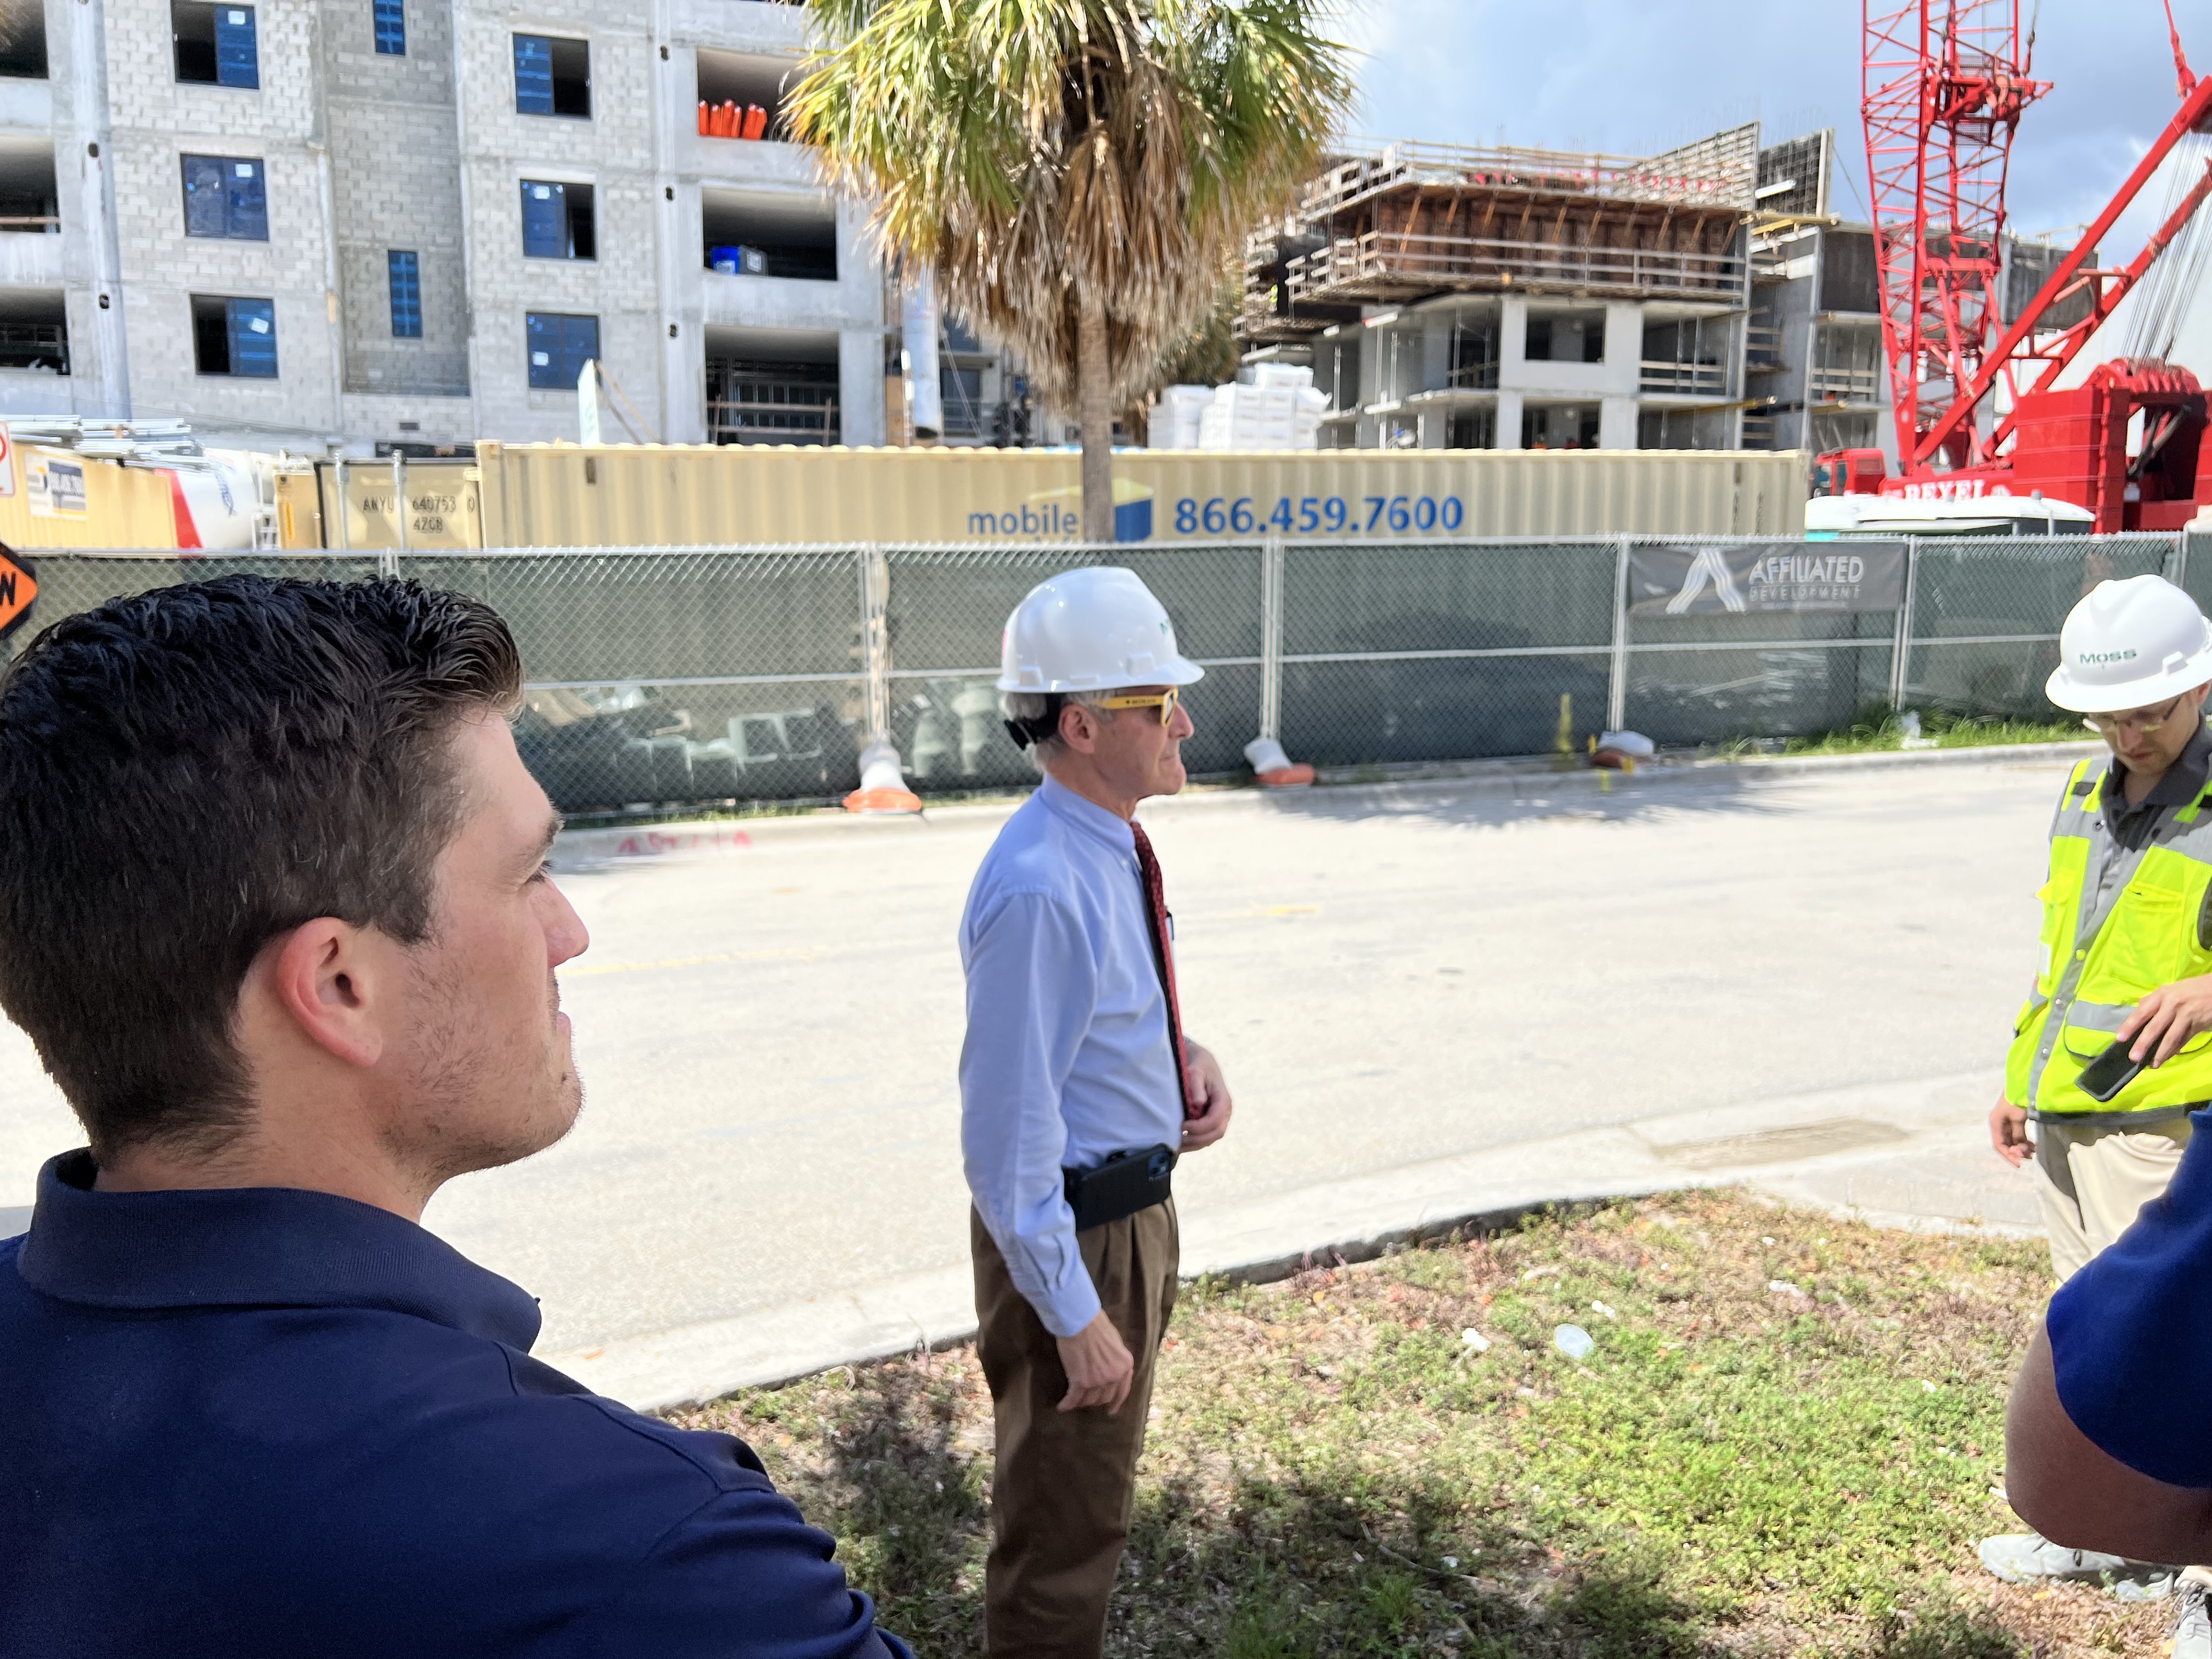 May 13th, 2022: The Board of Trustees toured 'The Grand' in WPB. The Plan has invested in this project which will bring much needed workforce housing to our first responders. The project by Affiliated Development should be complete in March of 2023. Nick Rojo, President of Affiliated led the tour (pictured in red shirt). To learn more please visit: http://affiliateddevelopment.com/properties.